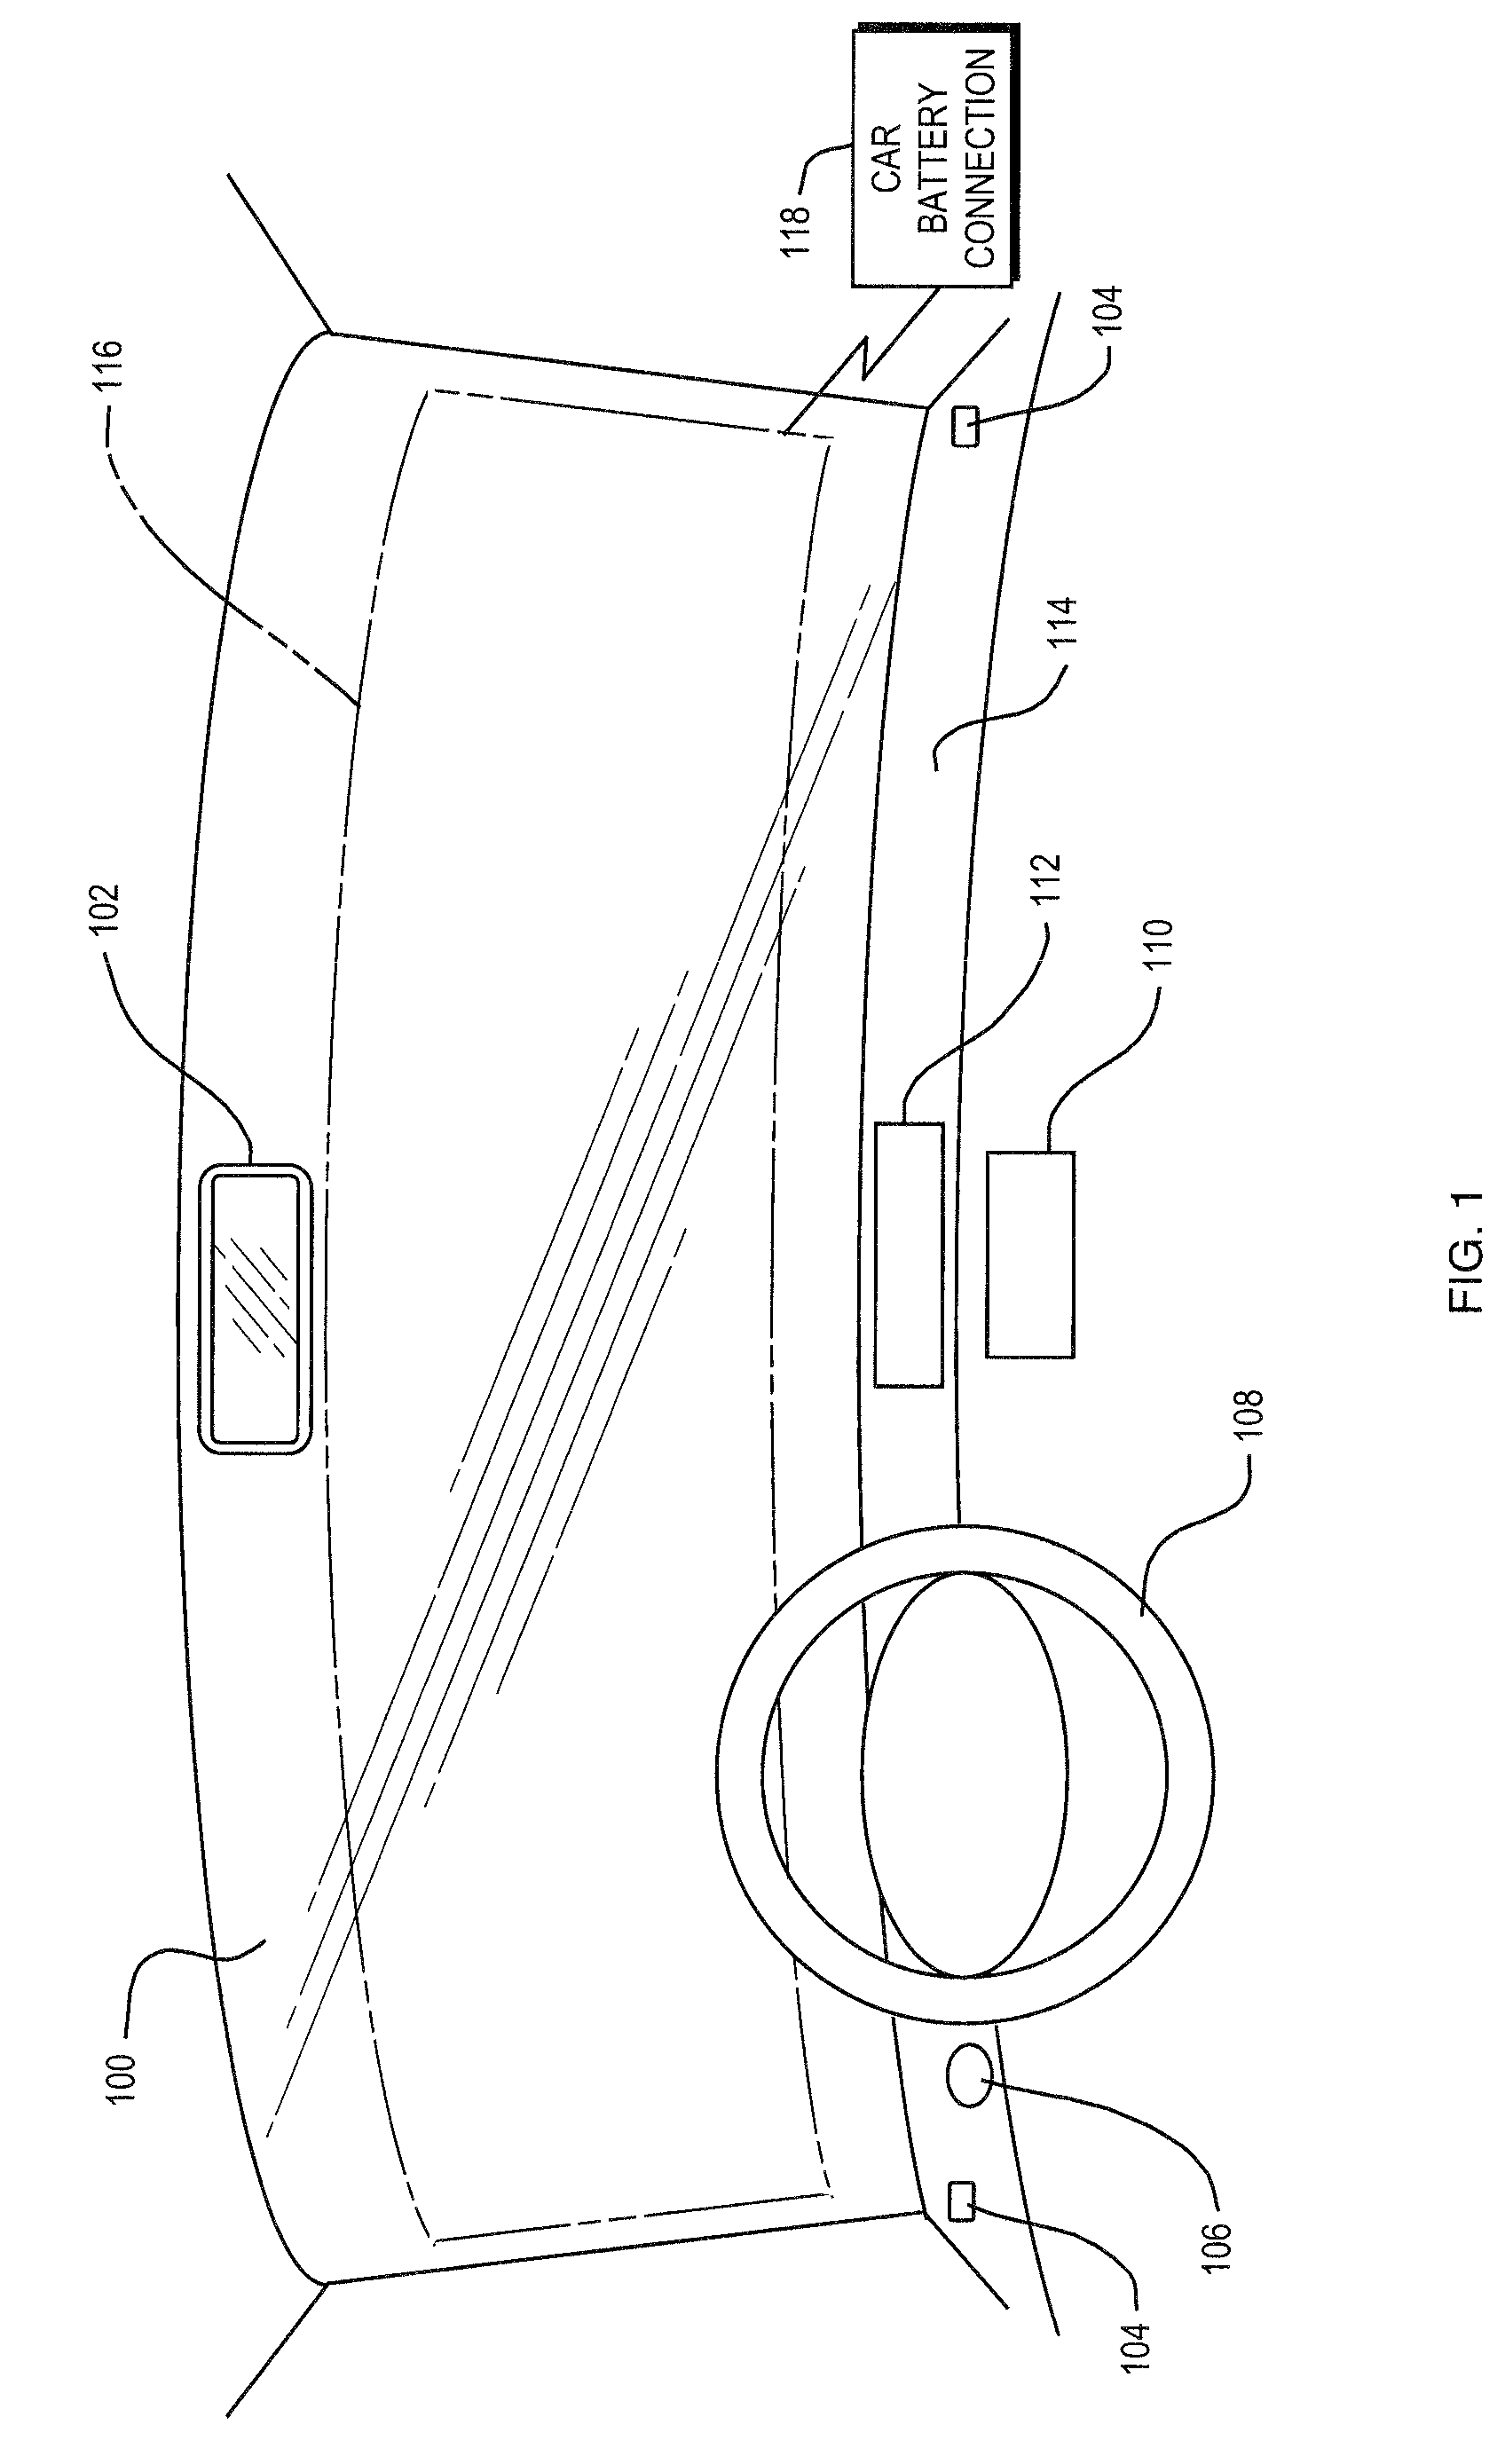 Digital windshield information system employing a recommendation engine keyed to a map database system